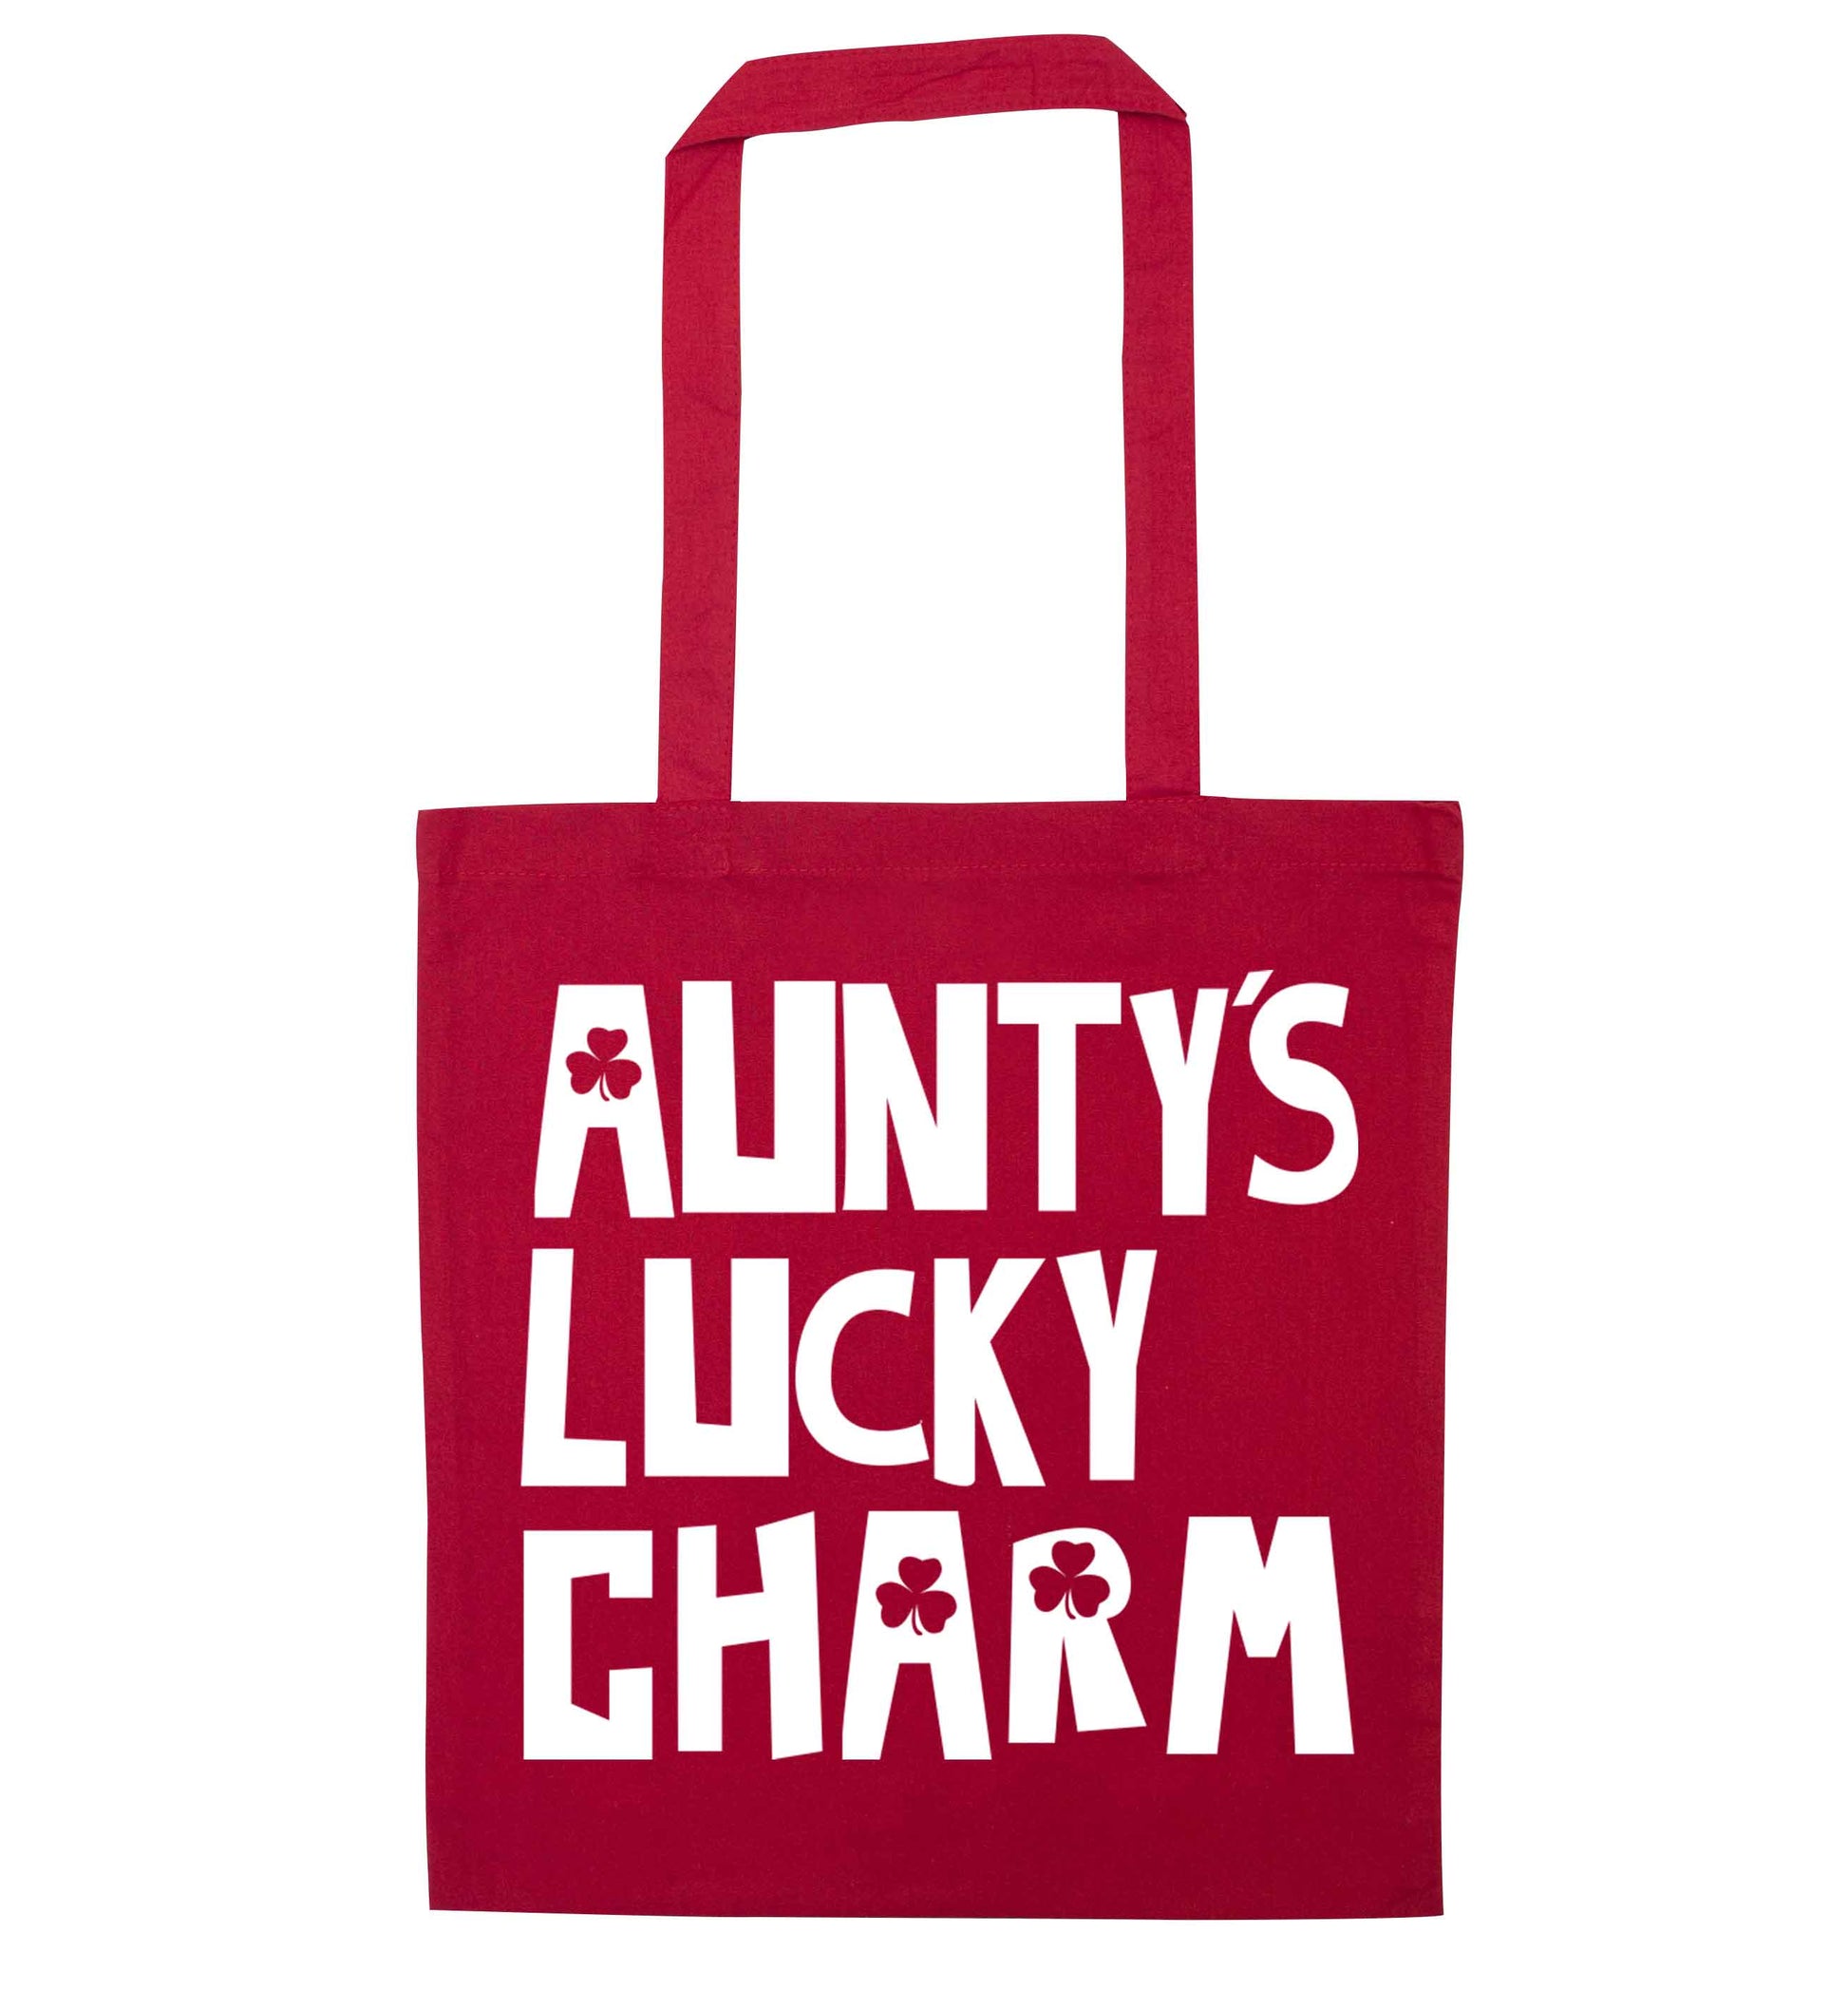 Aunty's lucky charm red tote bag